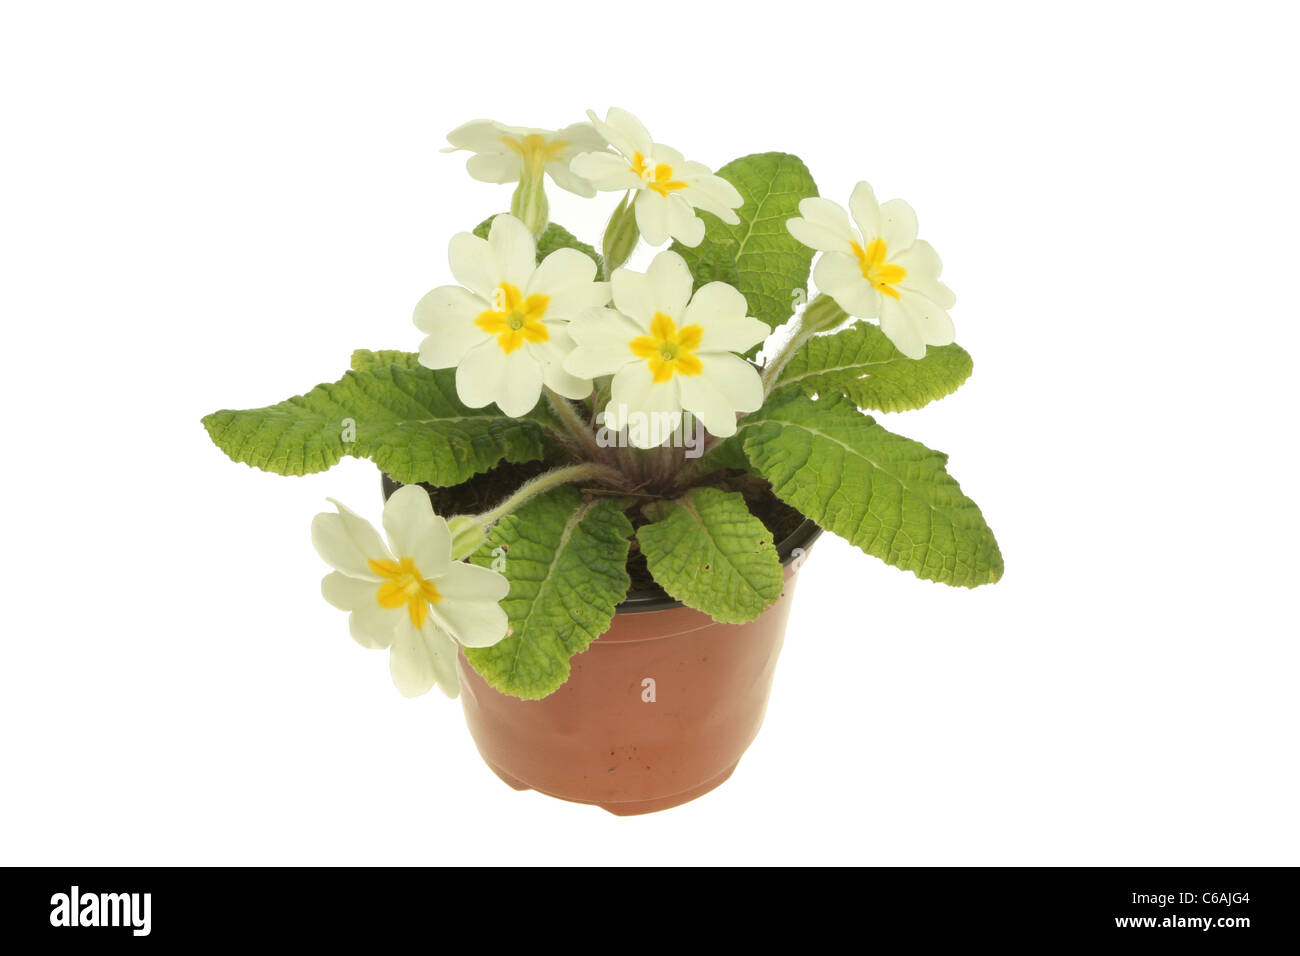 Primrose plant with cream flowers isolated against white Stock Photo